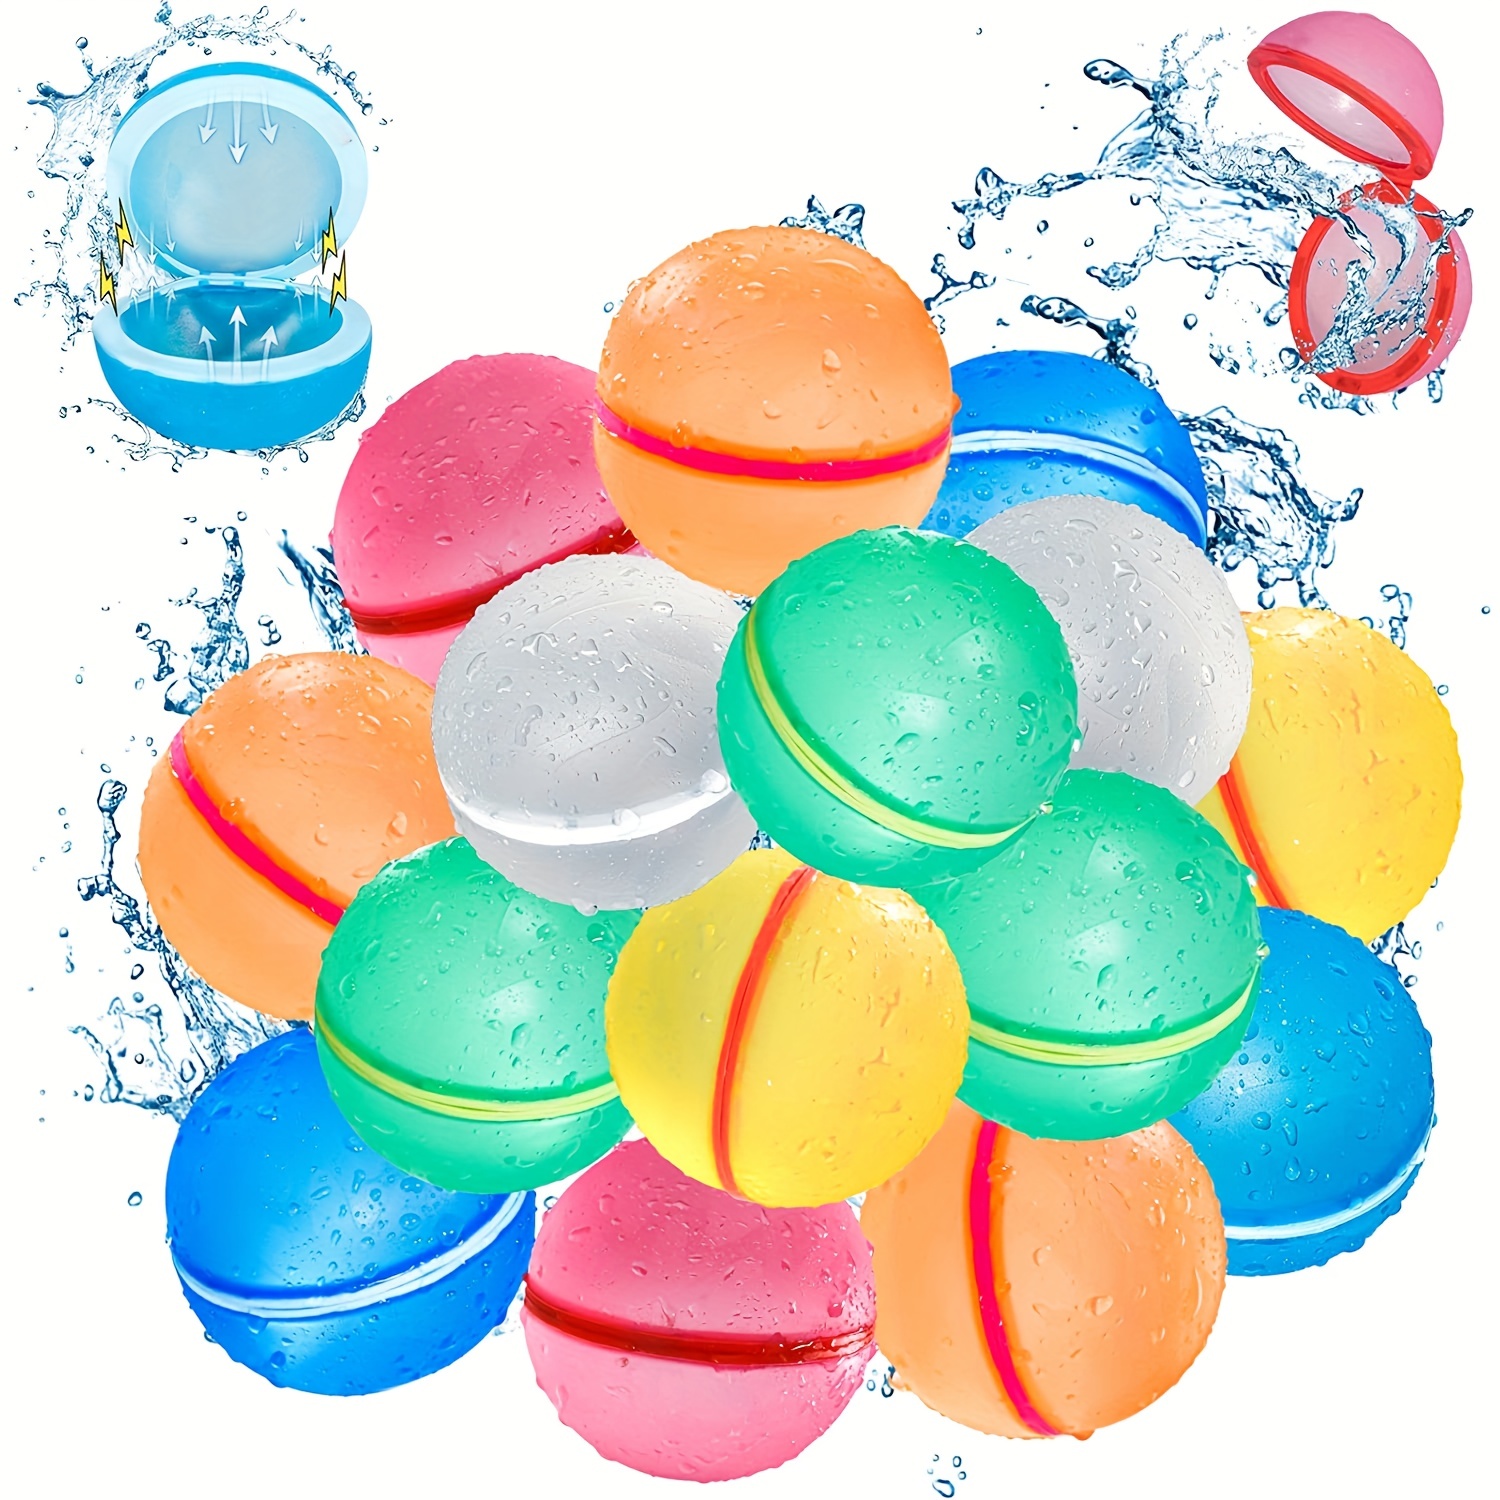 

Reusable Water Balloons, Latex-free Silicone Water Splash Ball, Magnetic Self-sealing Water Bomb For Kids Adults Outdoor Activities Water Games Toy Summer Fun Party Supplies